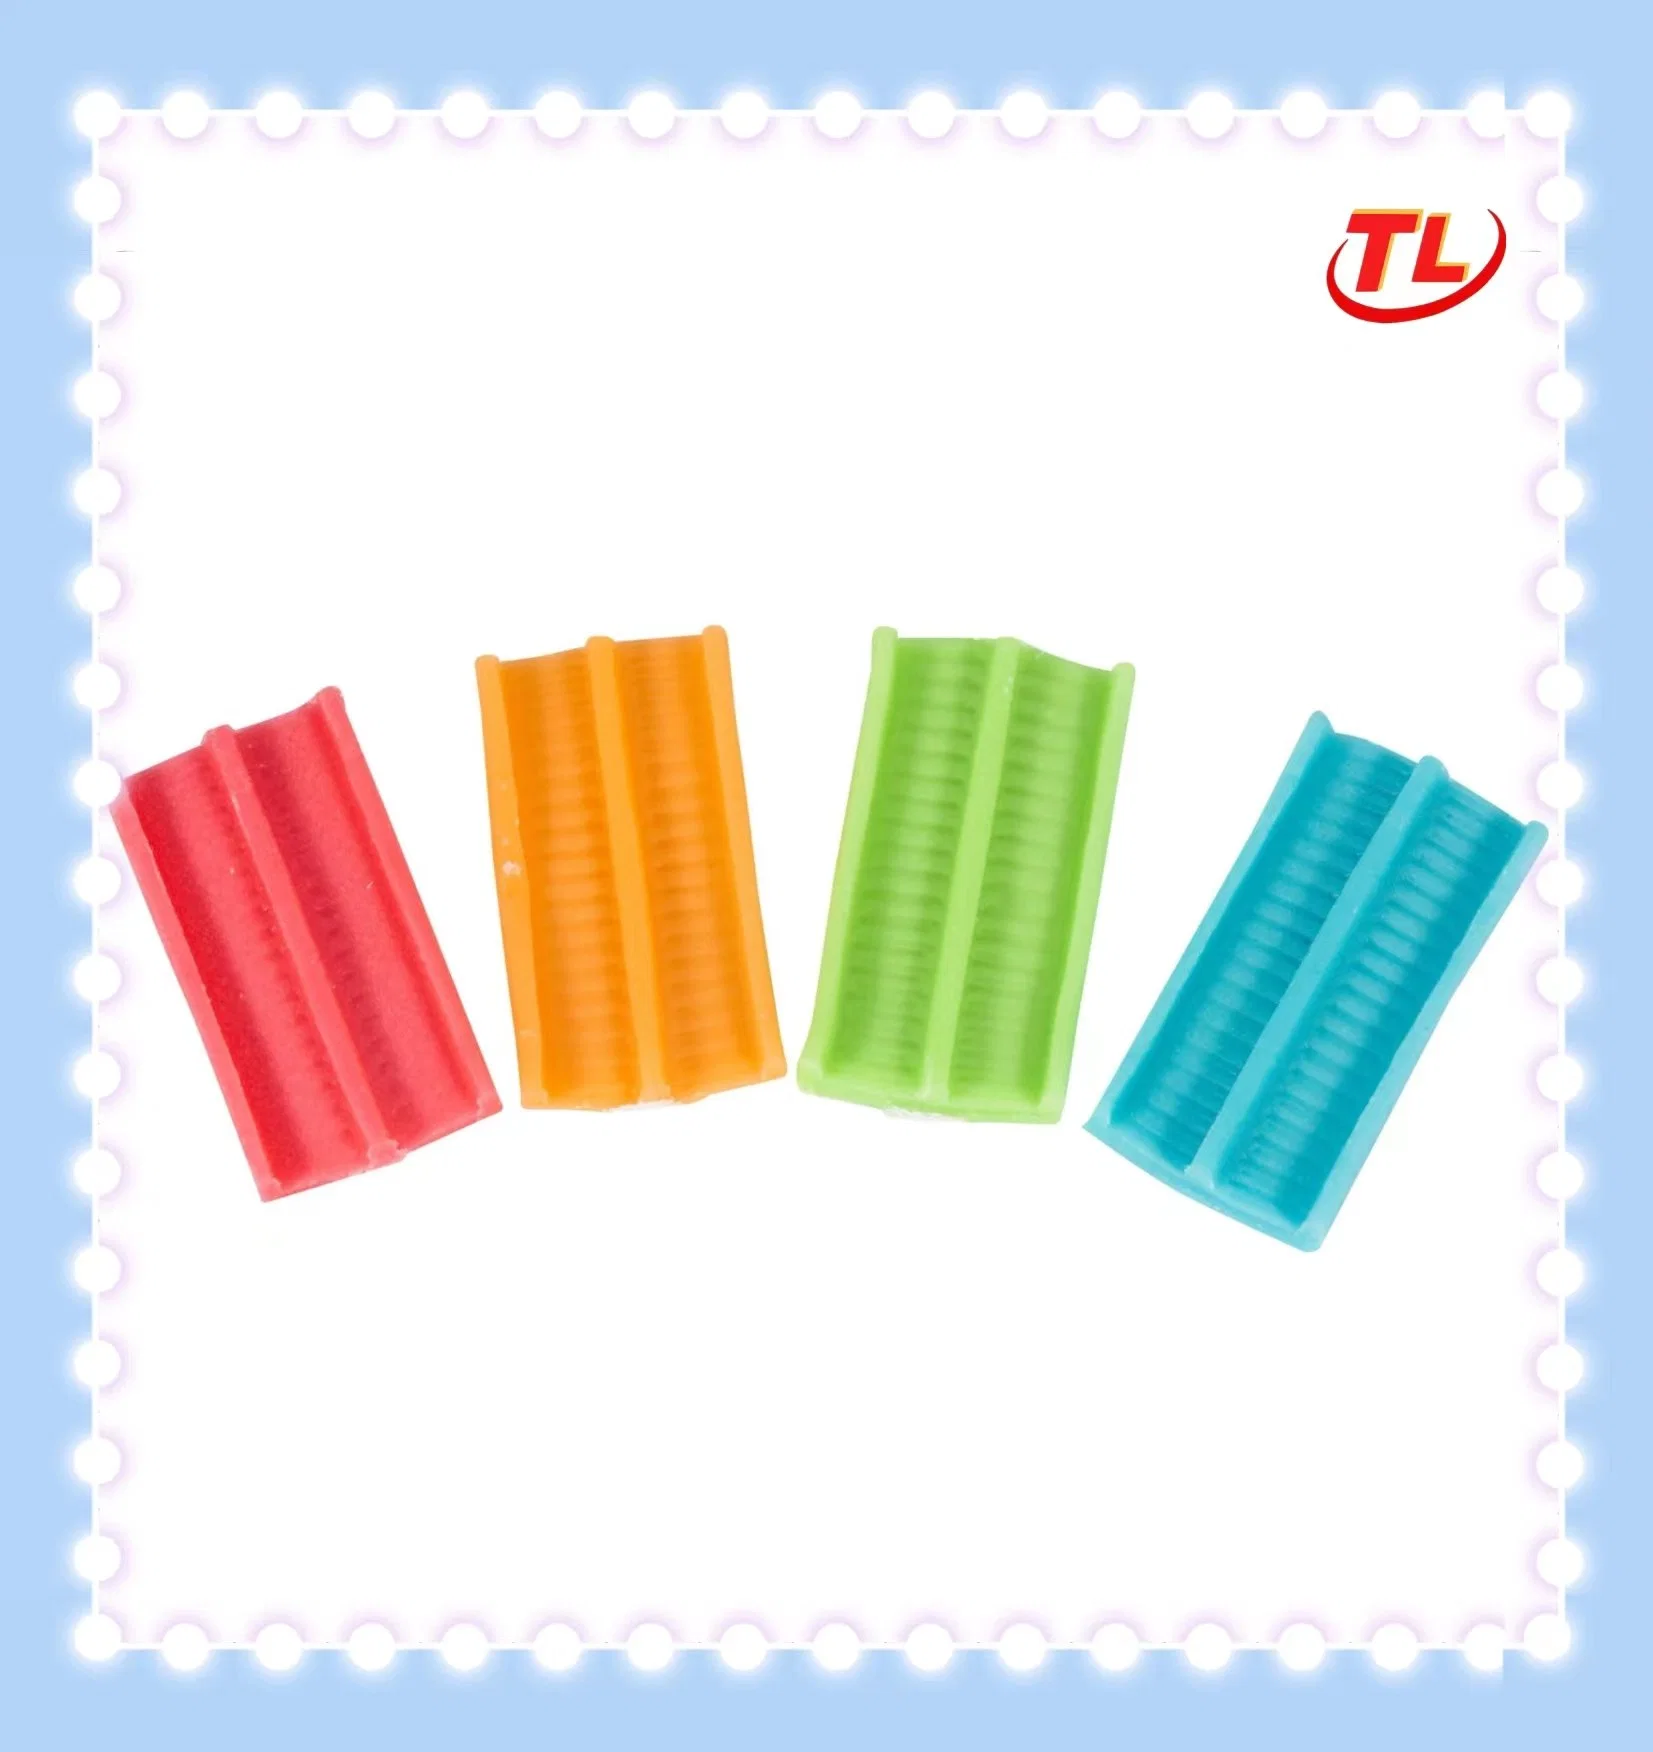 Delicious Taste Good-Looking Chewing Tattoo Bubble Gum Candy for Party